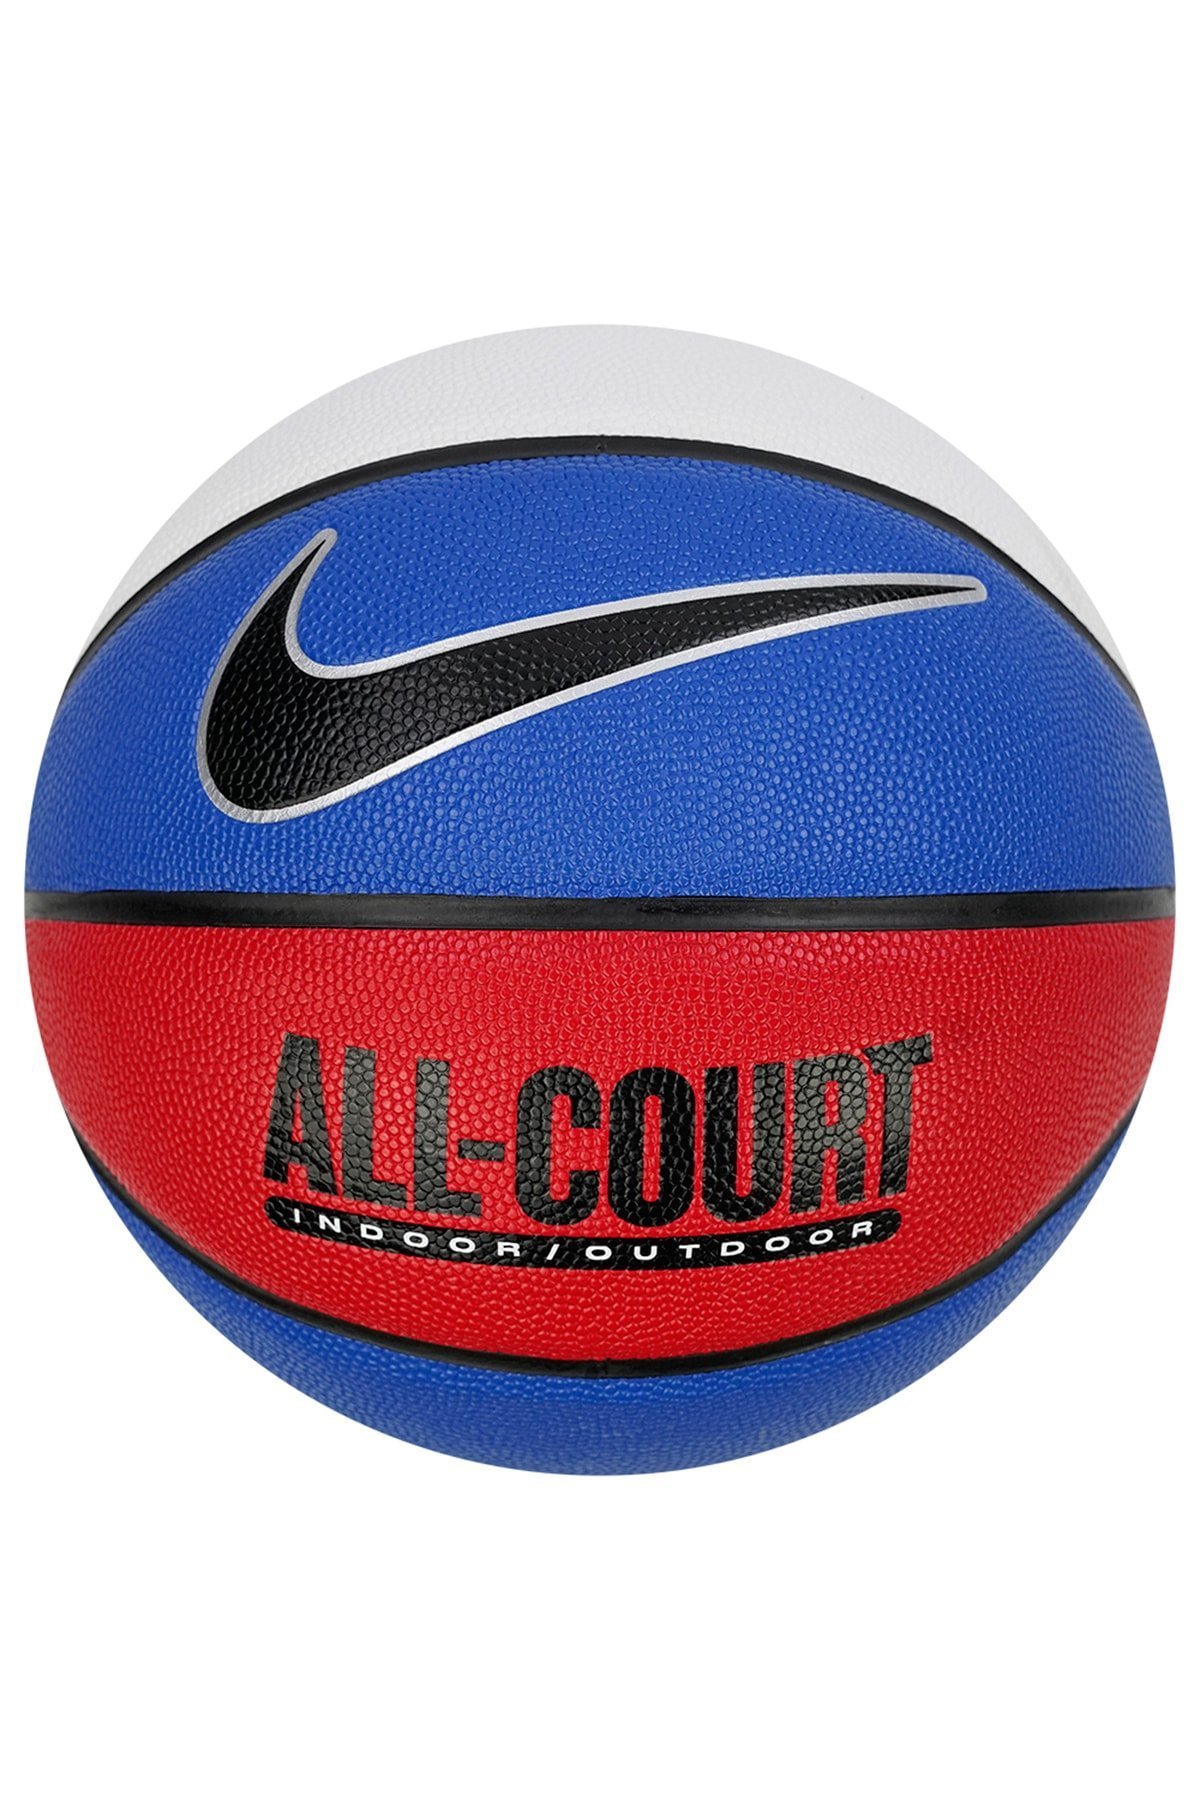 N1004369-470 Everyday All Courts 8p 7 No Basketbol Topu